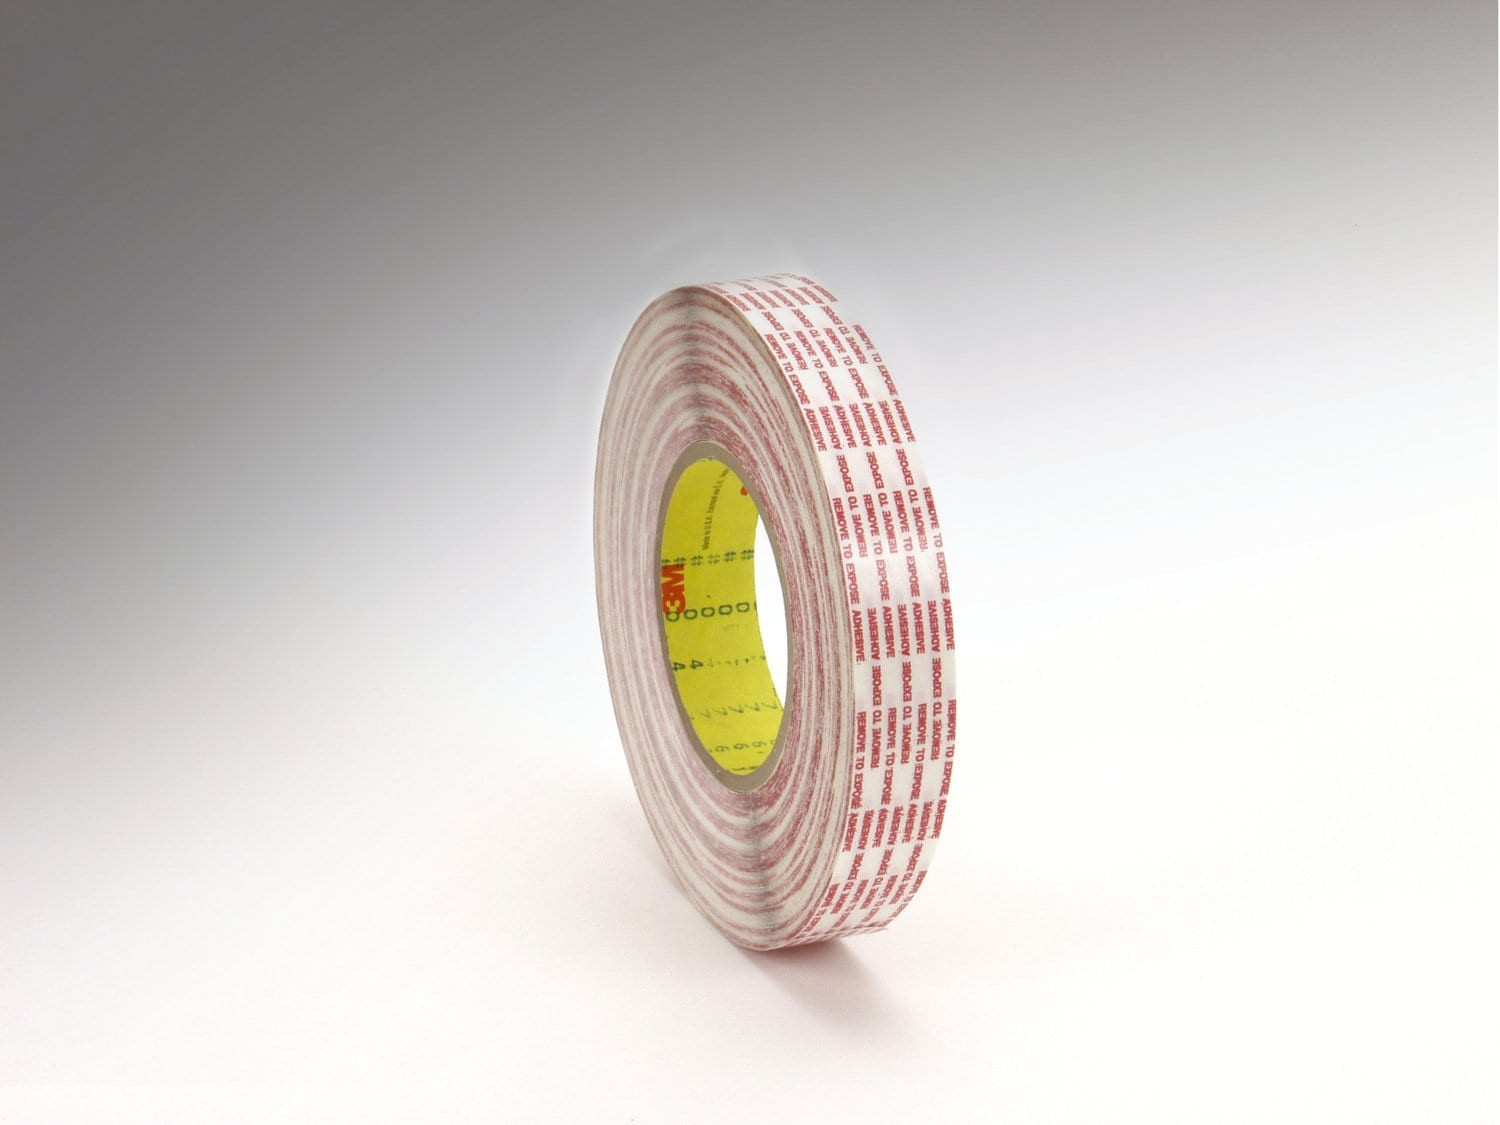 7010292652 - 3M Double Coated Tape Extended Liner 476XL, Translucent, 1 1/2 in x 60
yd, 6 mil, 24 rolls per case